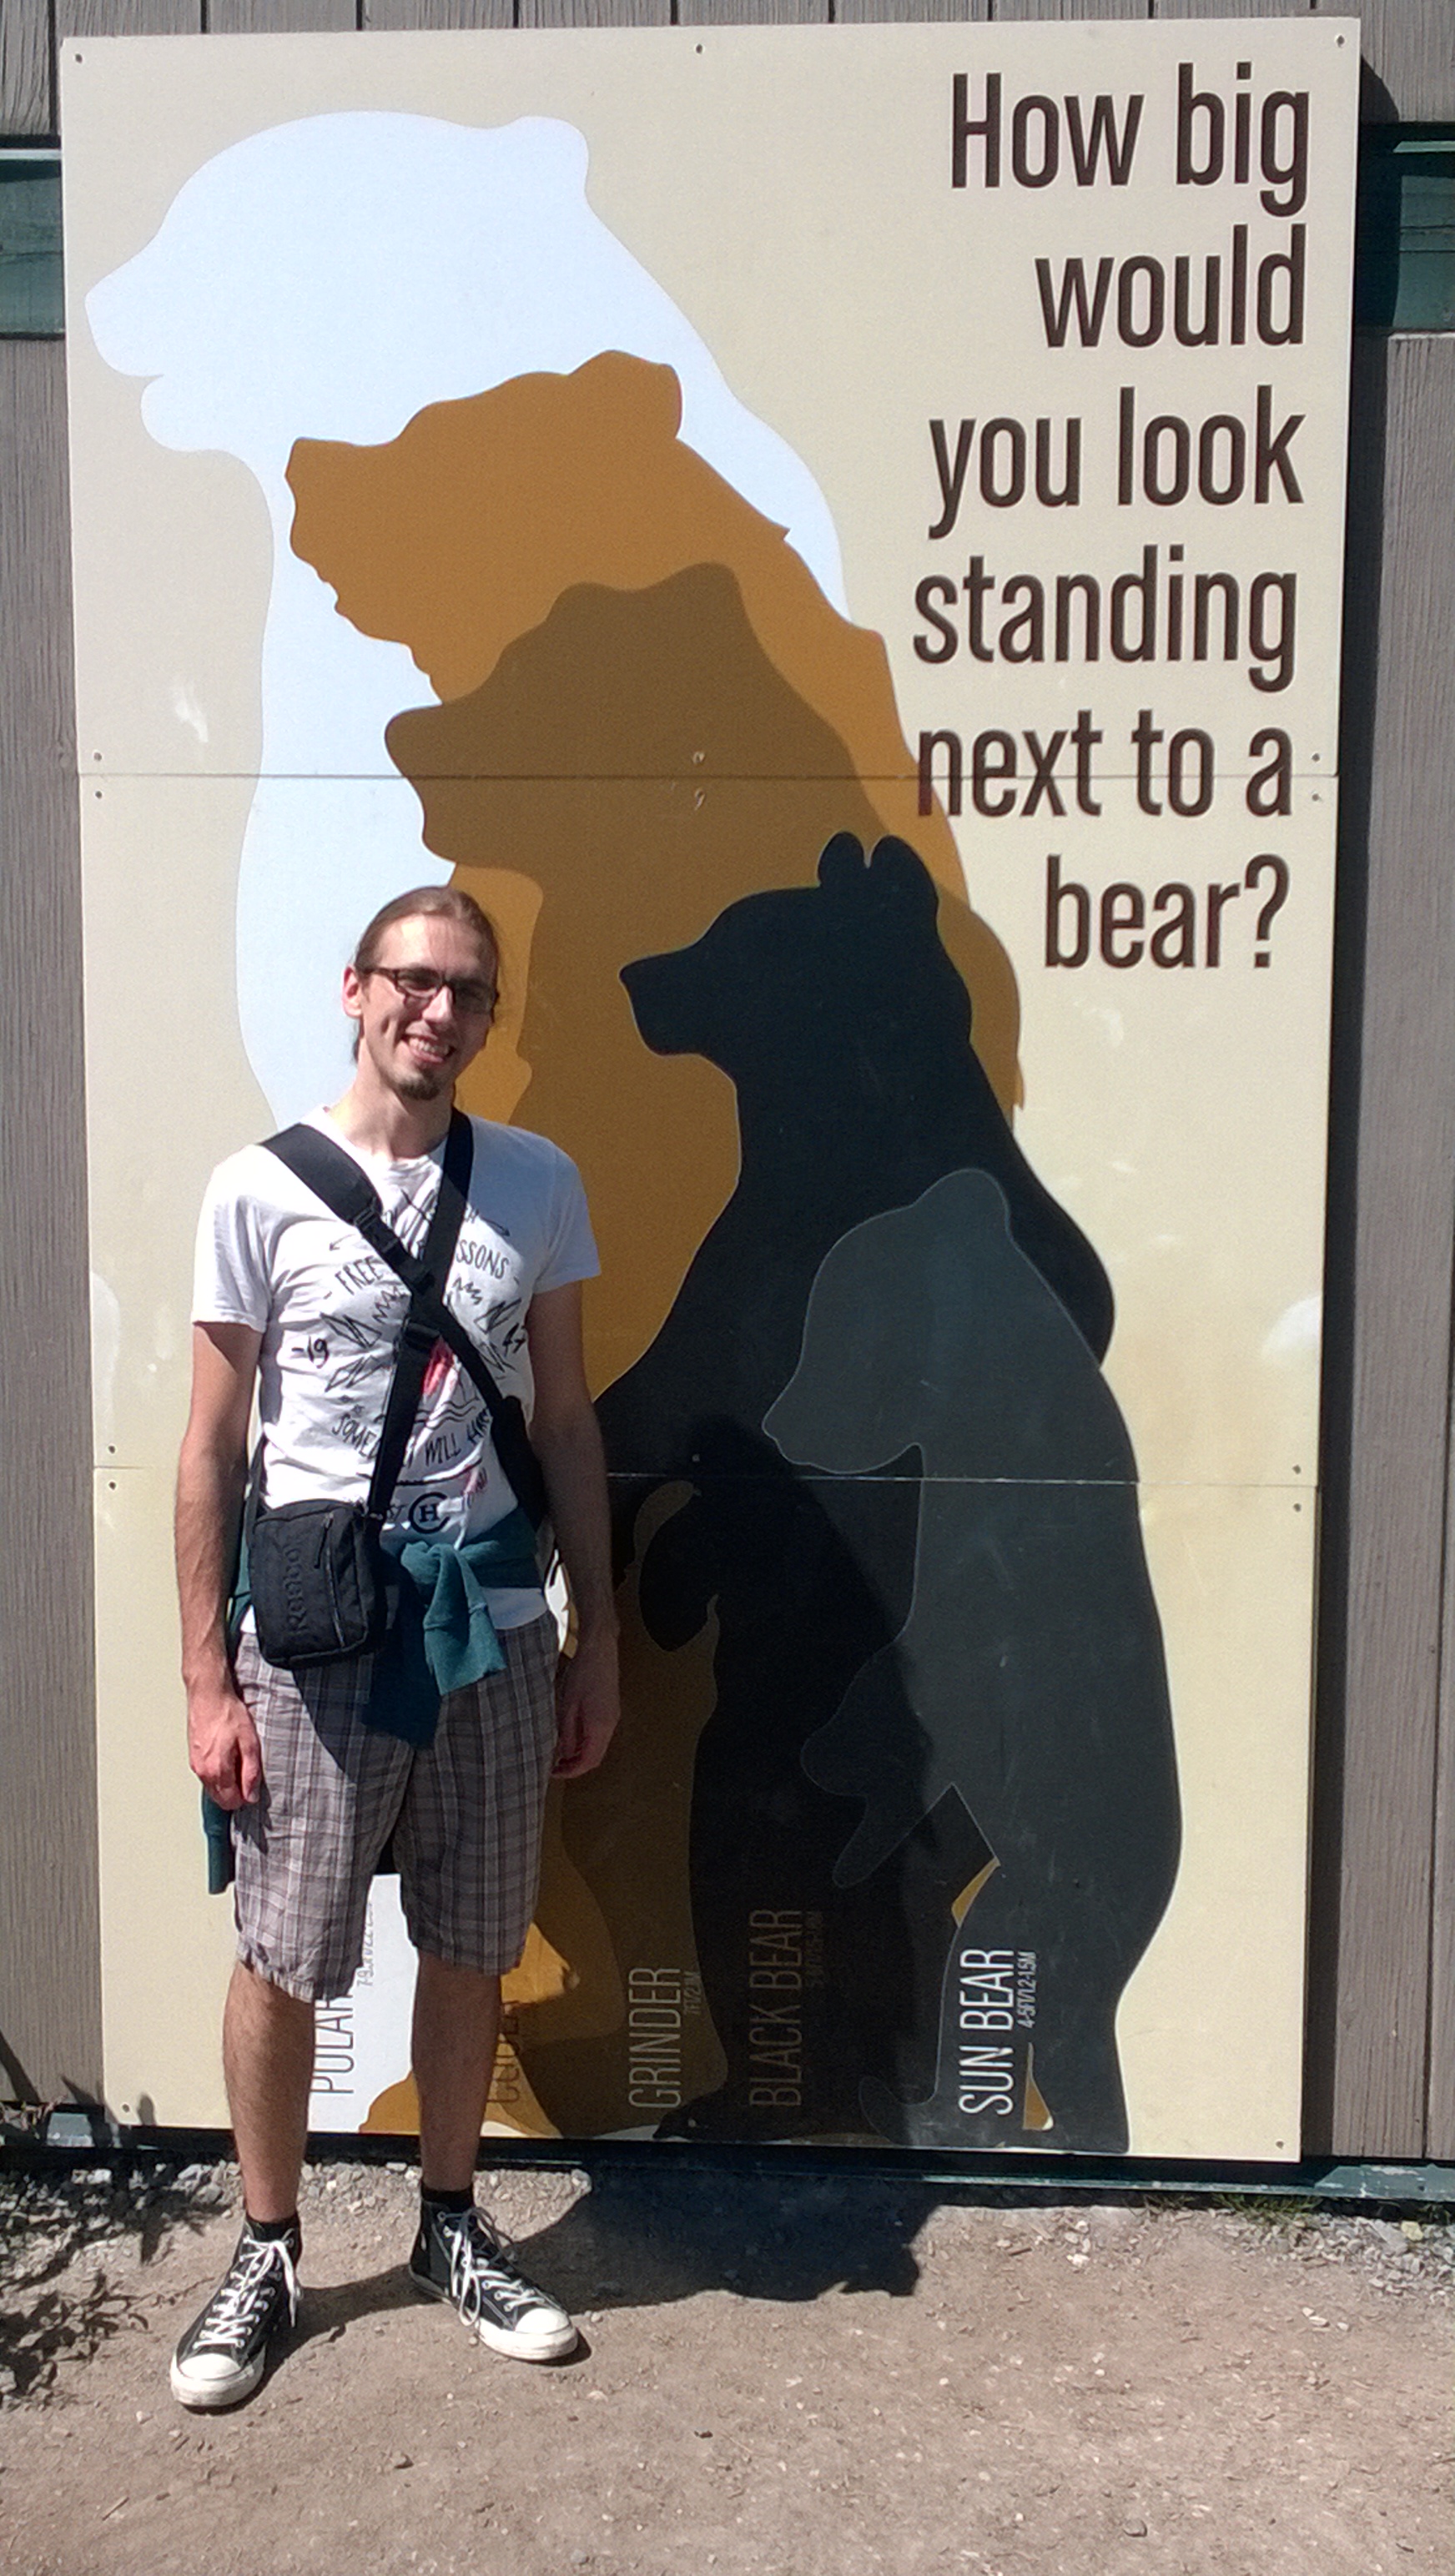 How big would you look standing next to a bear?